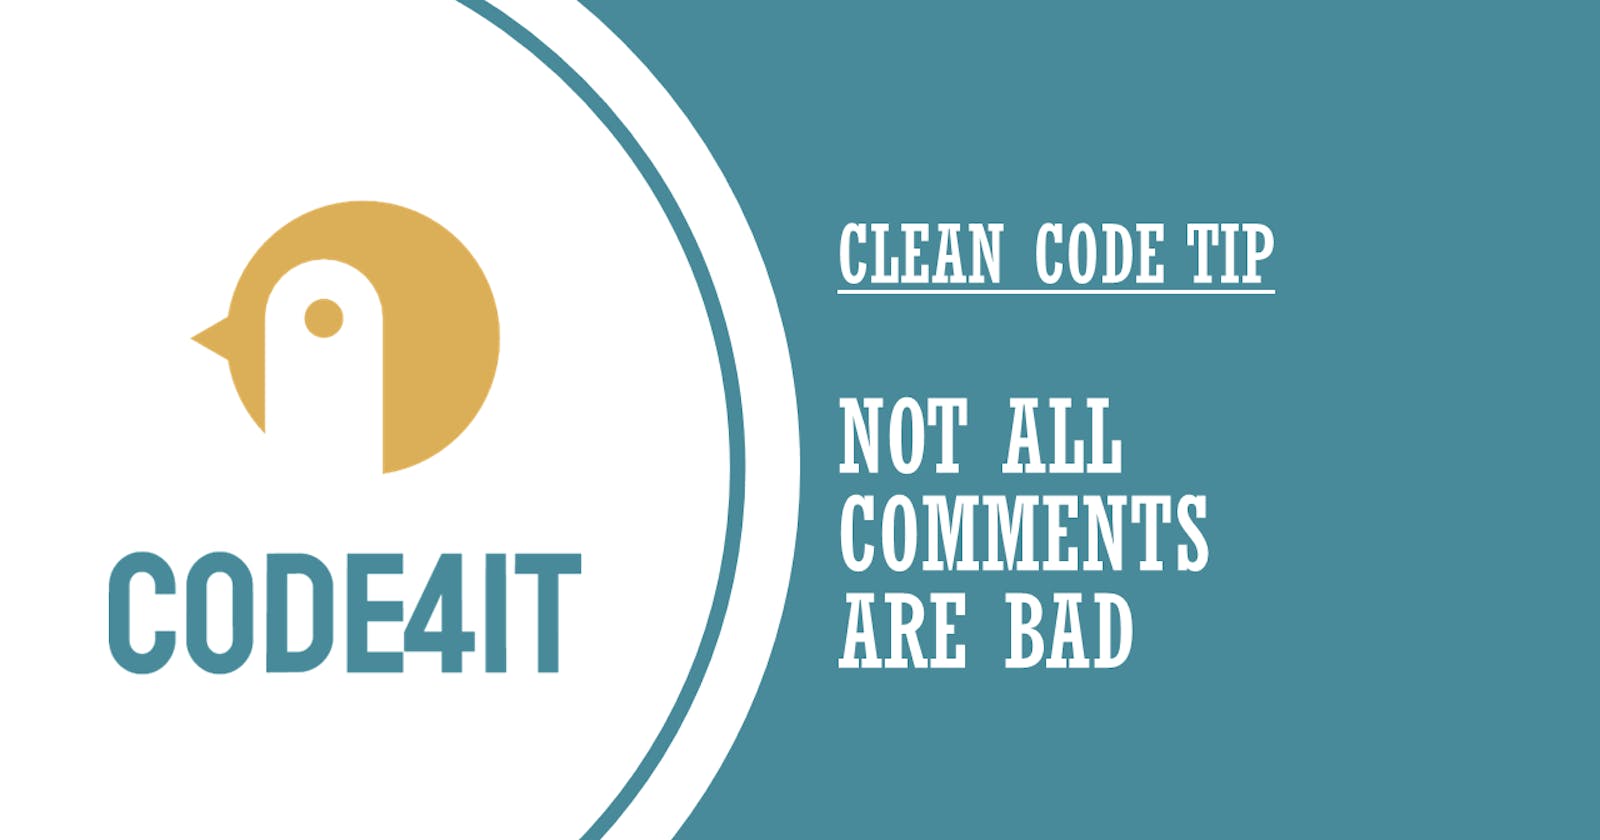 Clean Code Tip: Not all comments are bad